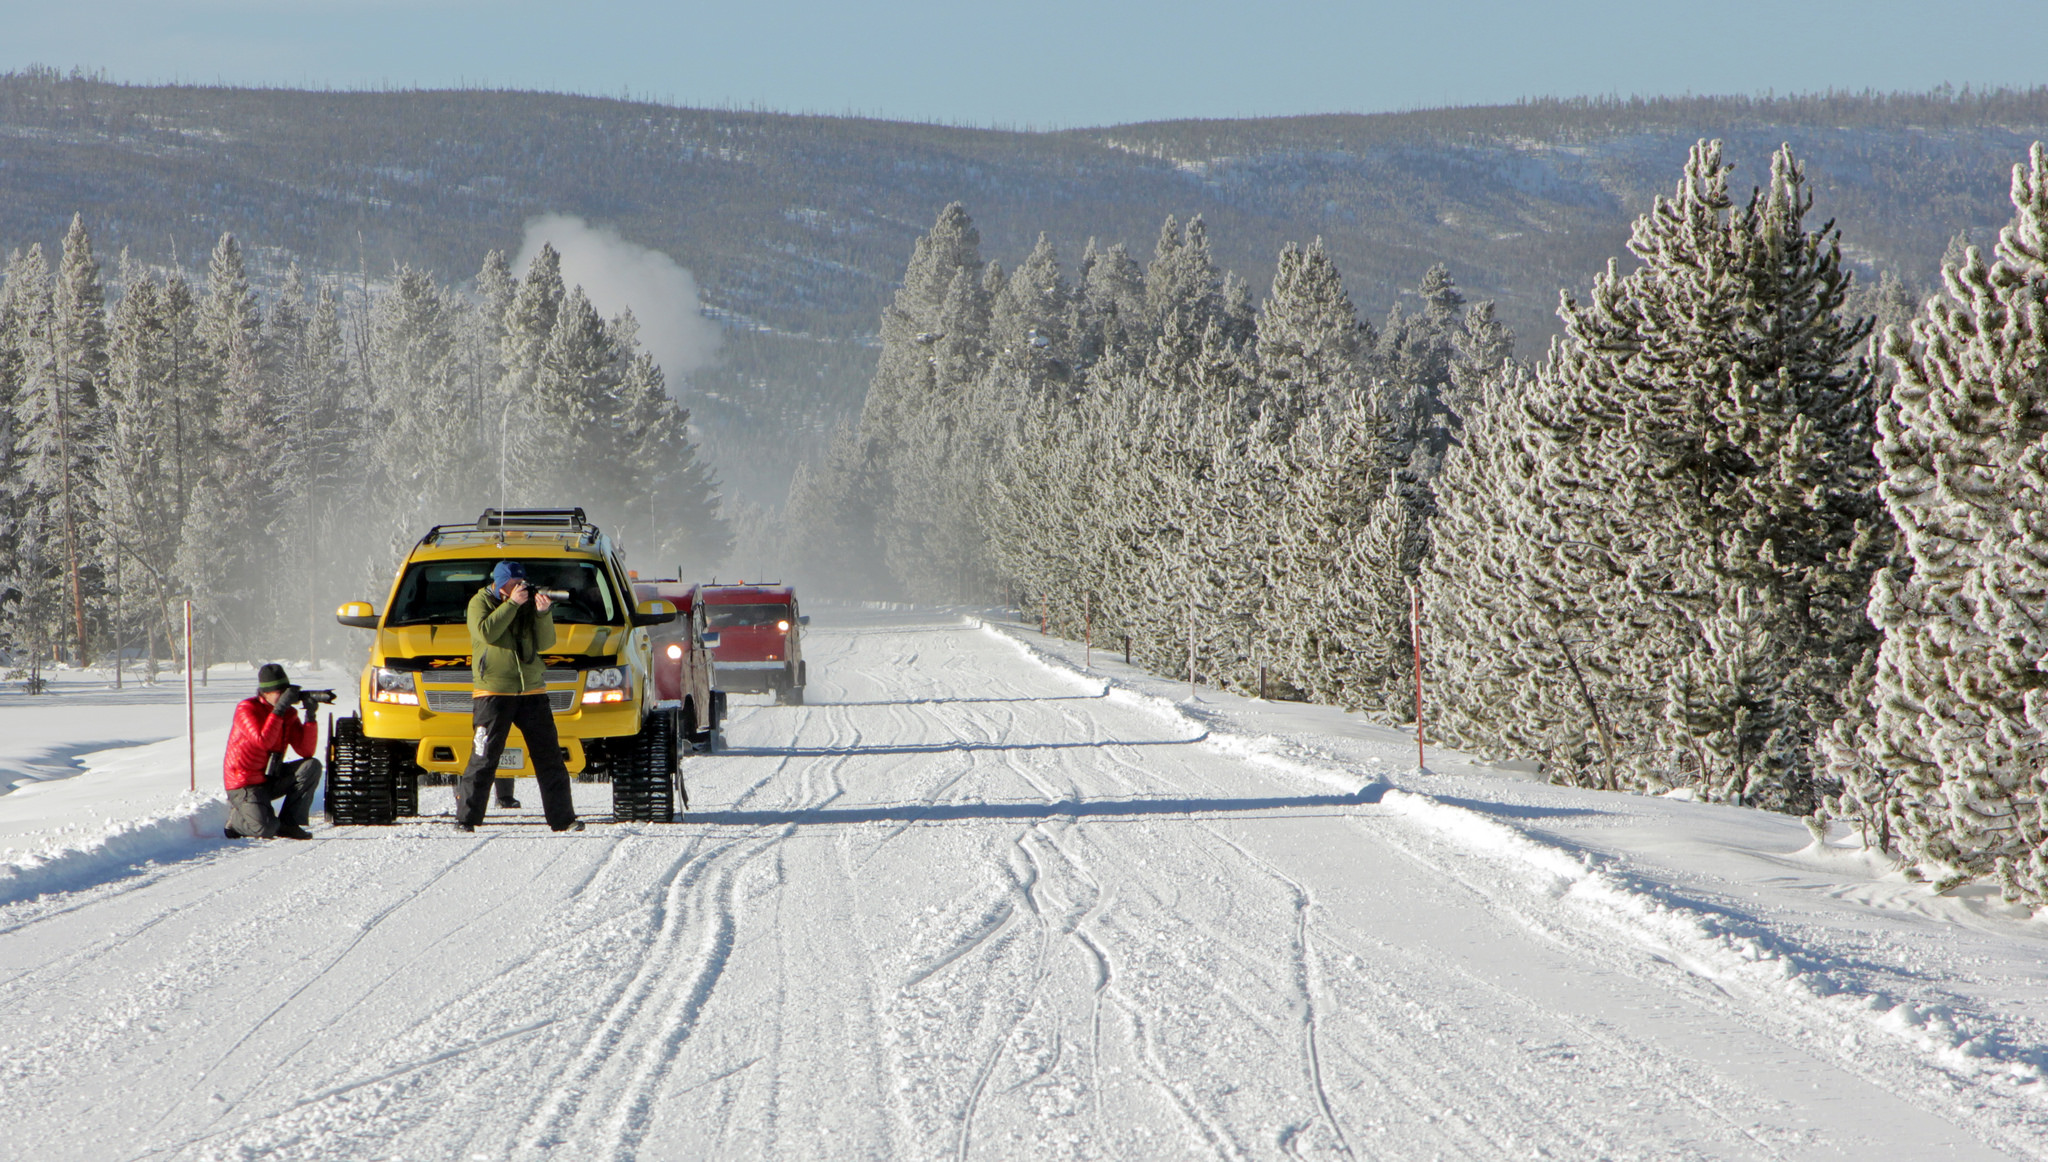 Experiencing Yellowstone by Snowcoach is the ideal way to see this timeless national park in winter ... photo by CC user yellowstonenps on Flickr